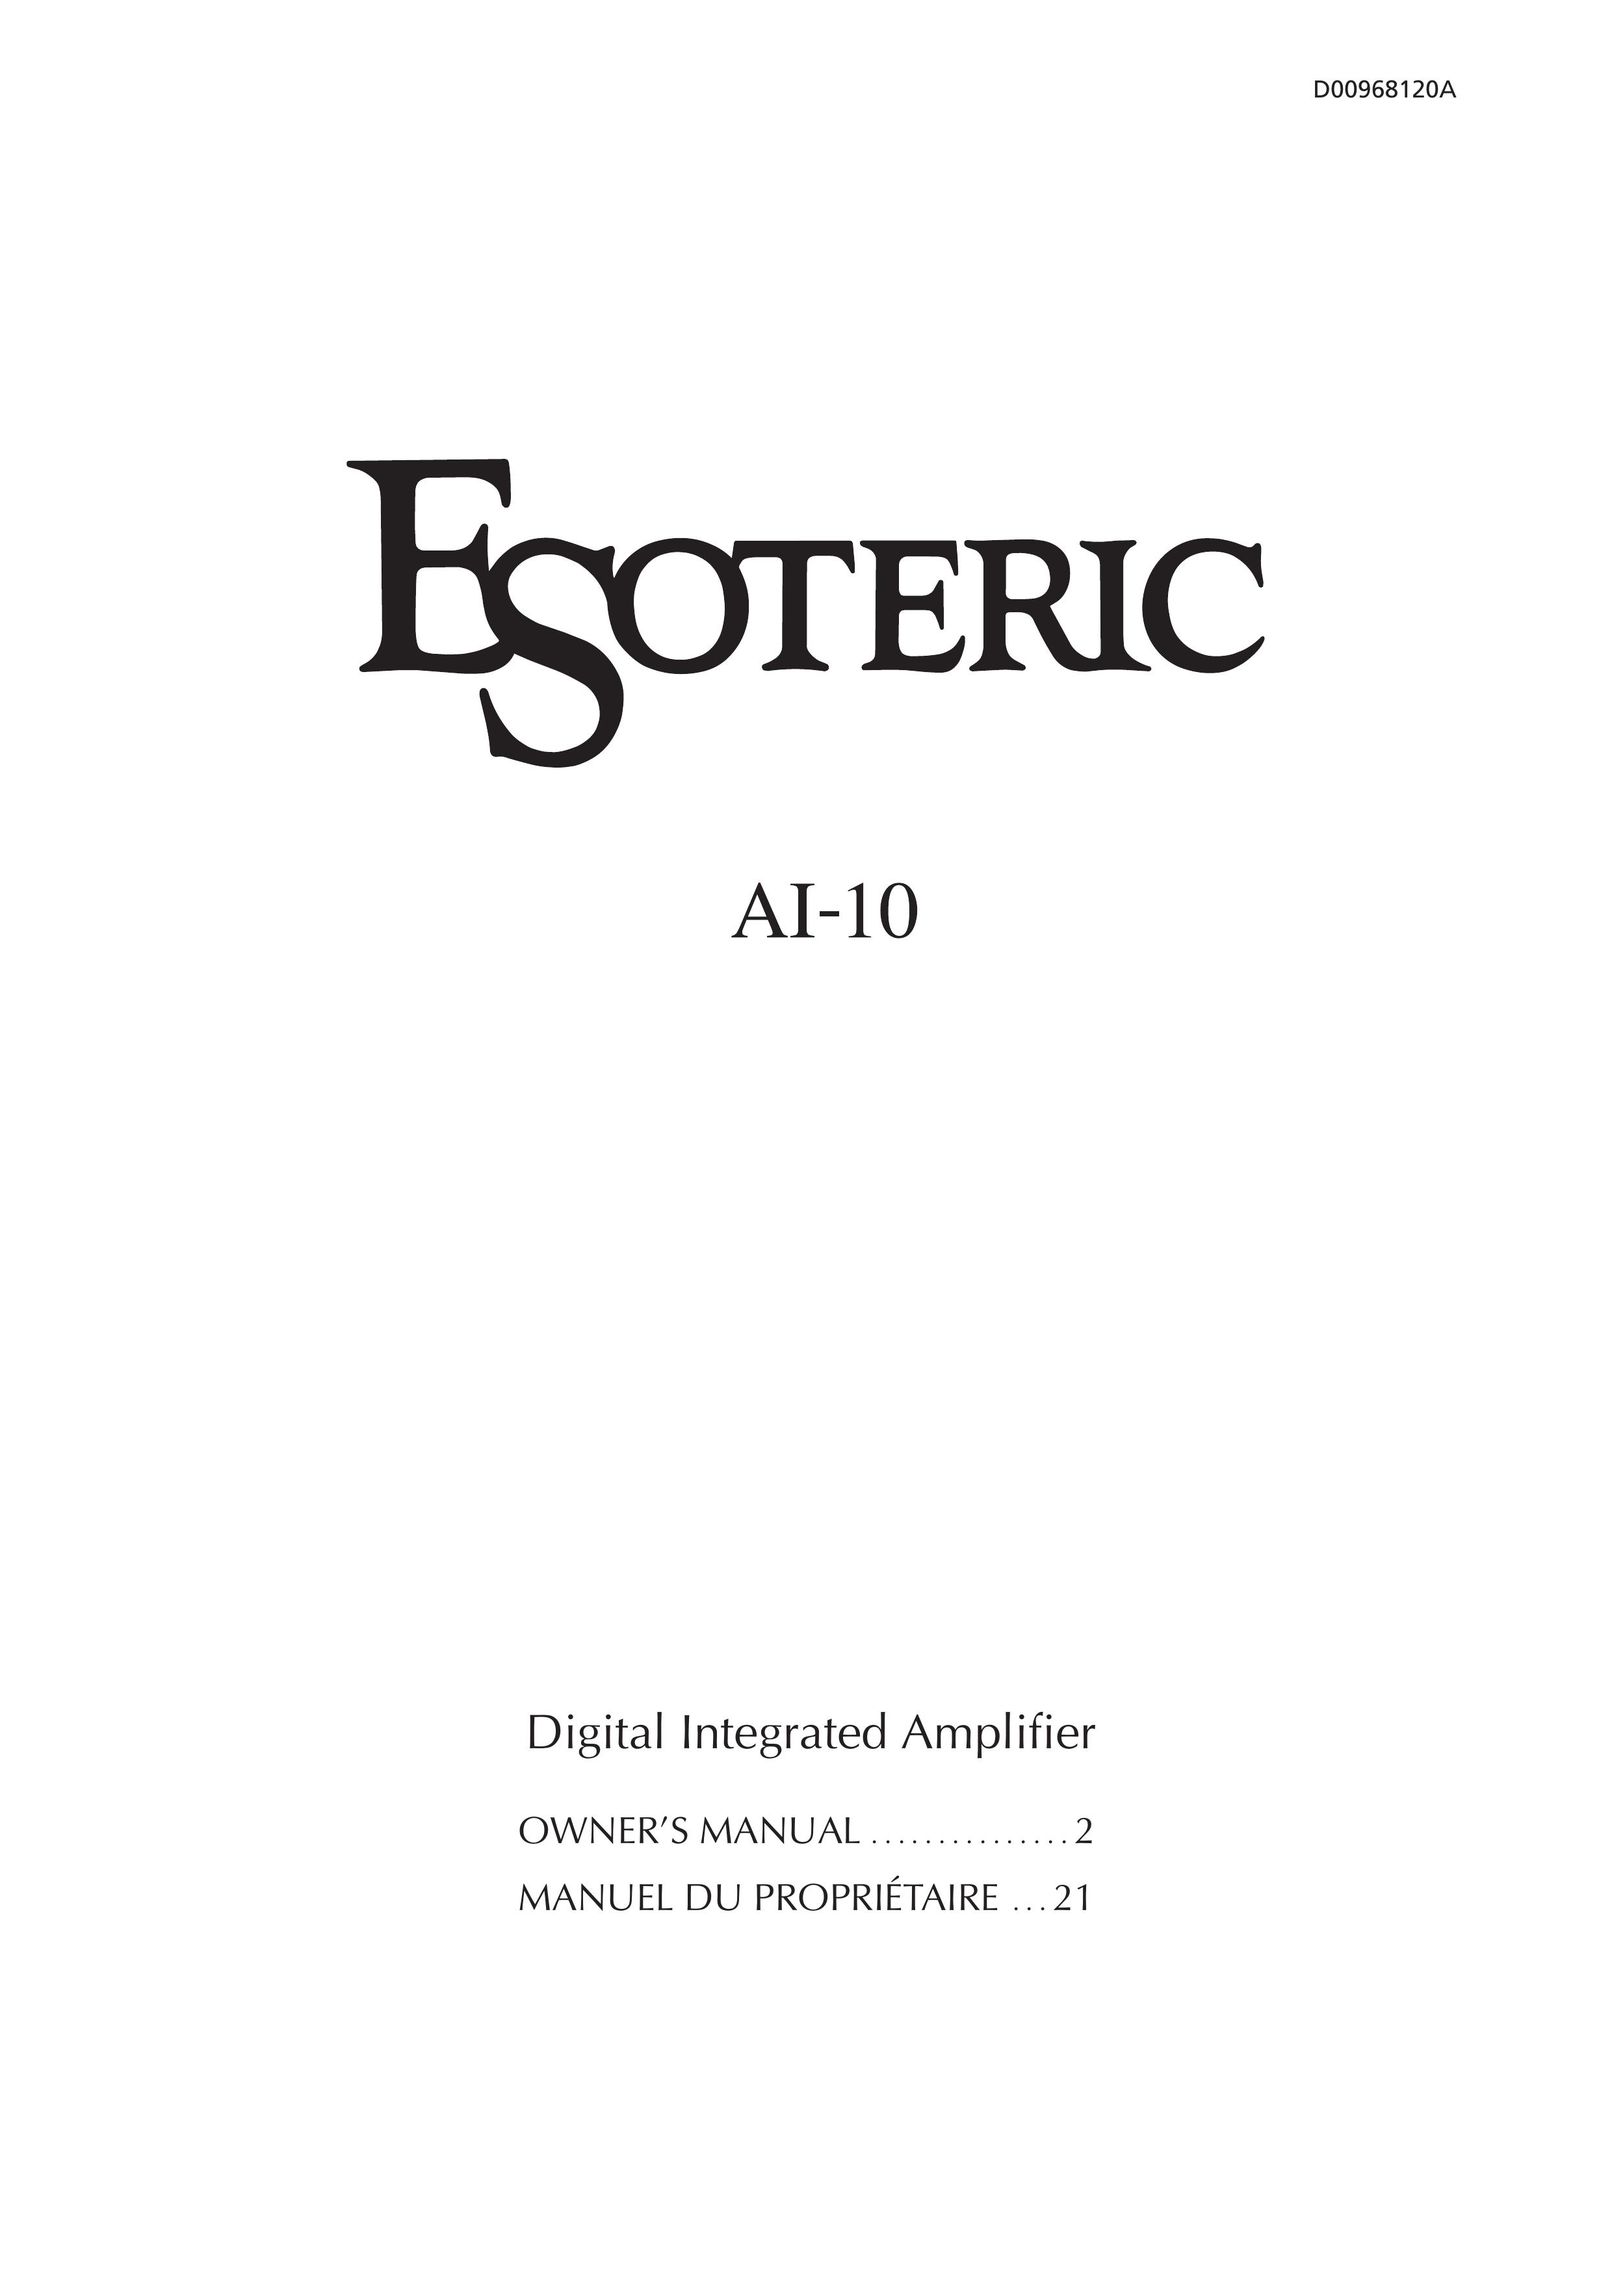 Esoteric AI-10 Stereo Amplifier User Manual